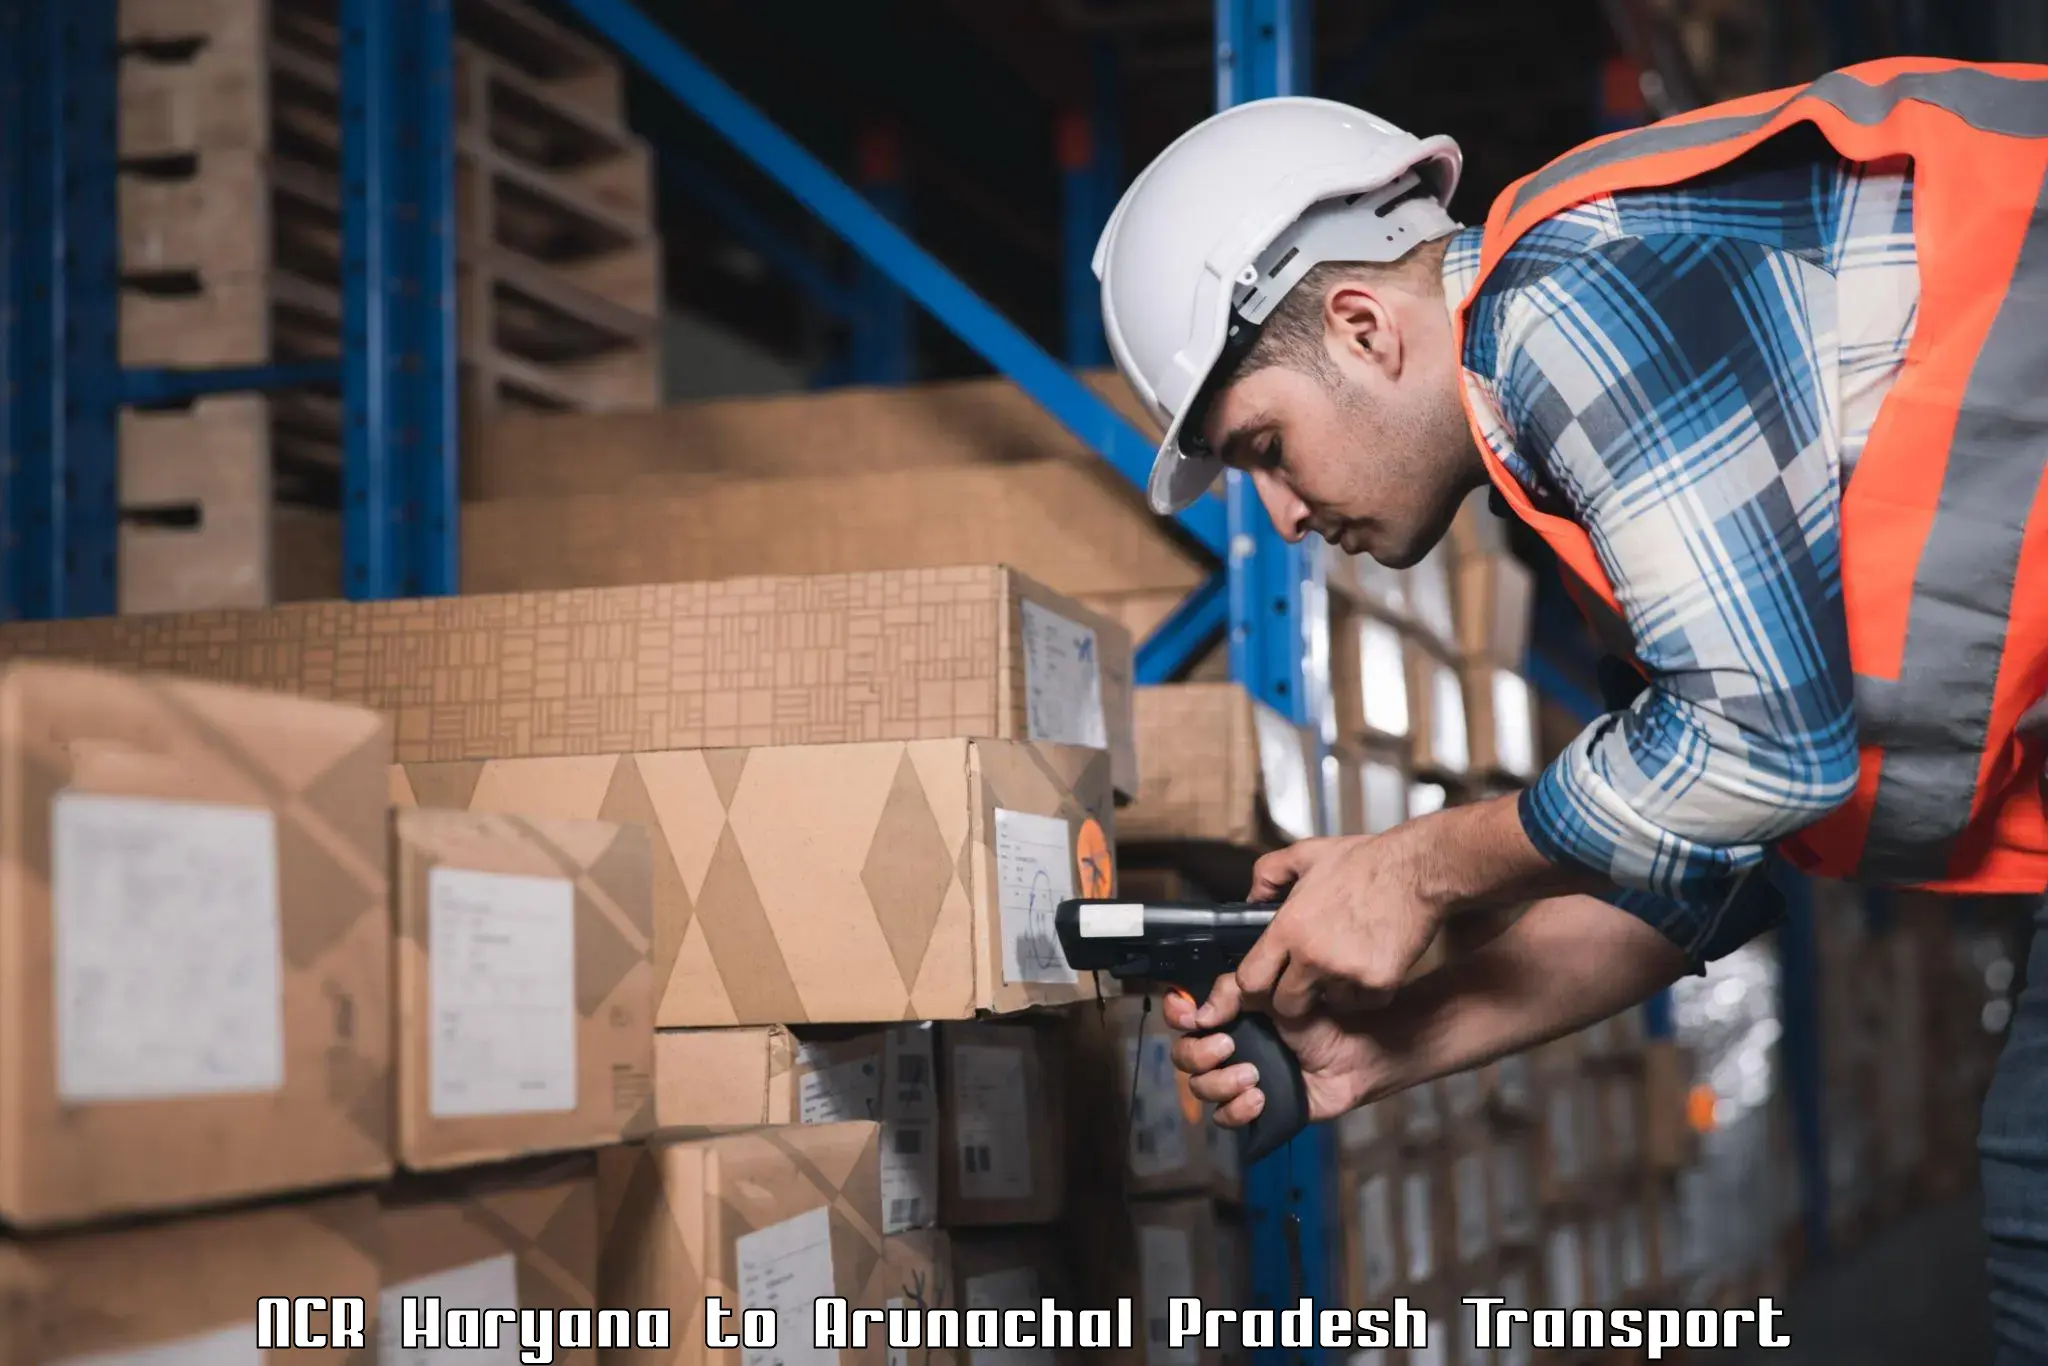 Parcel transport services NCR Haryana to Changlang